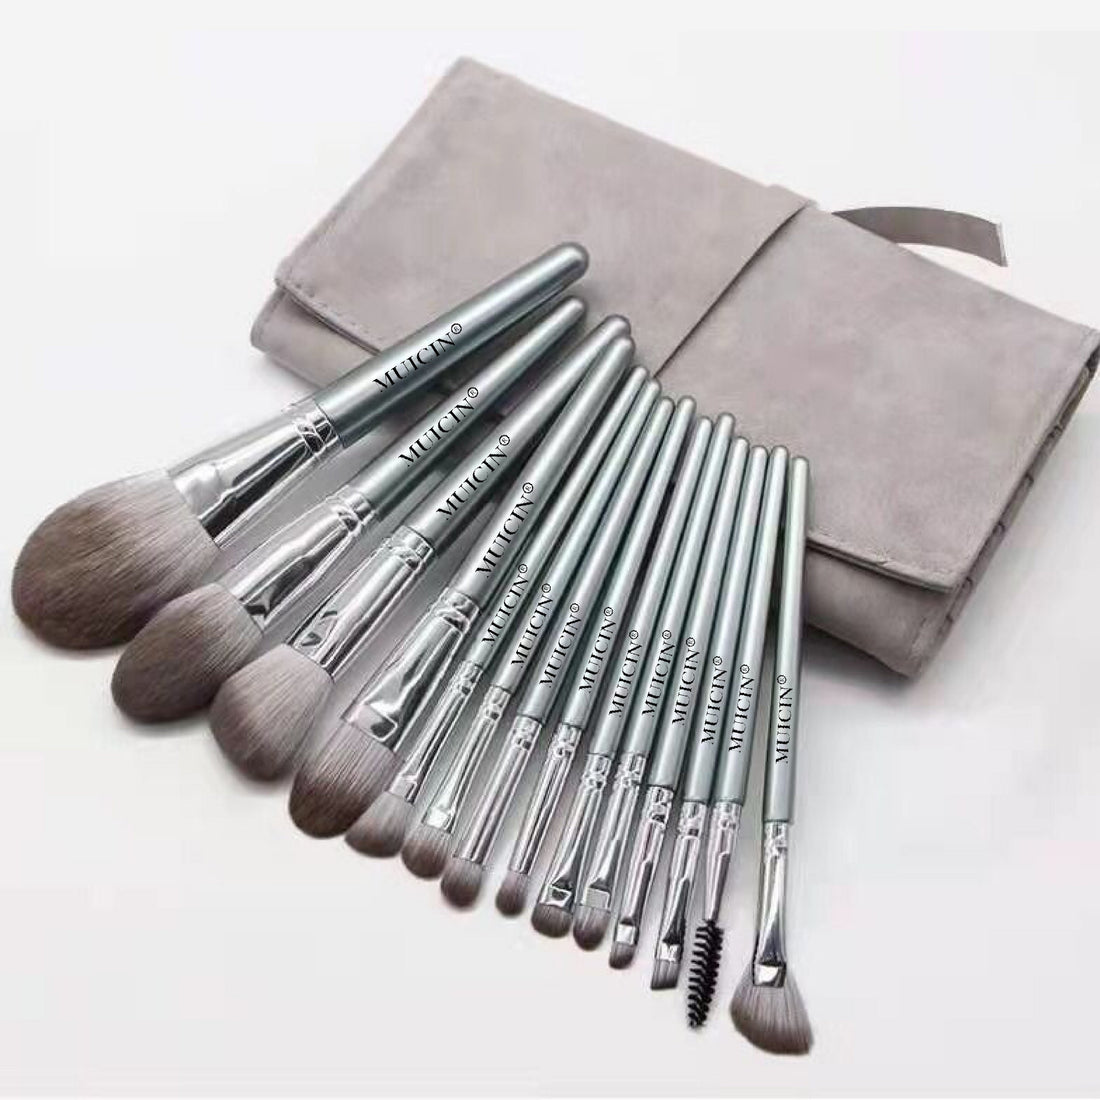 PROFESSIONAL 14-PIECE MAKEUP BRUSH SET IN GREY LEATHER POUCH - FOR THE ULTIMATE BEAUTY ENTHUSIAST